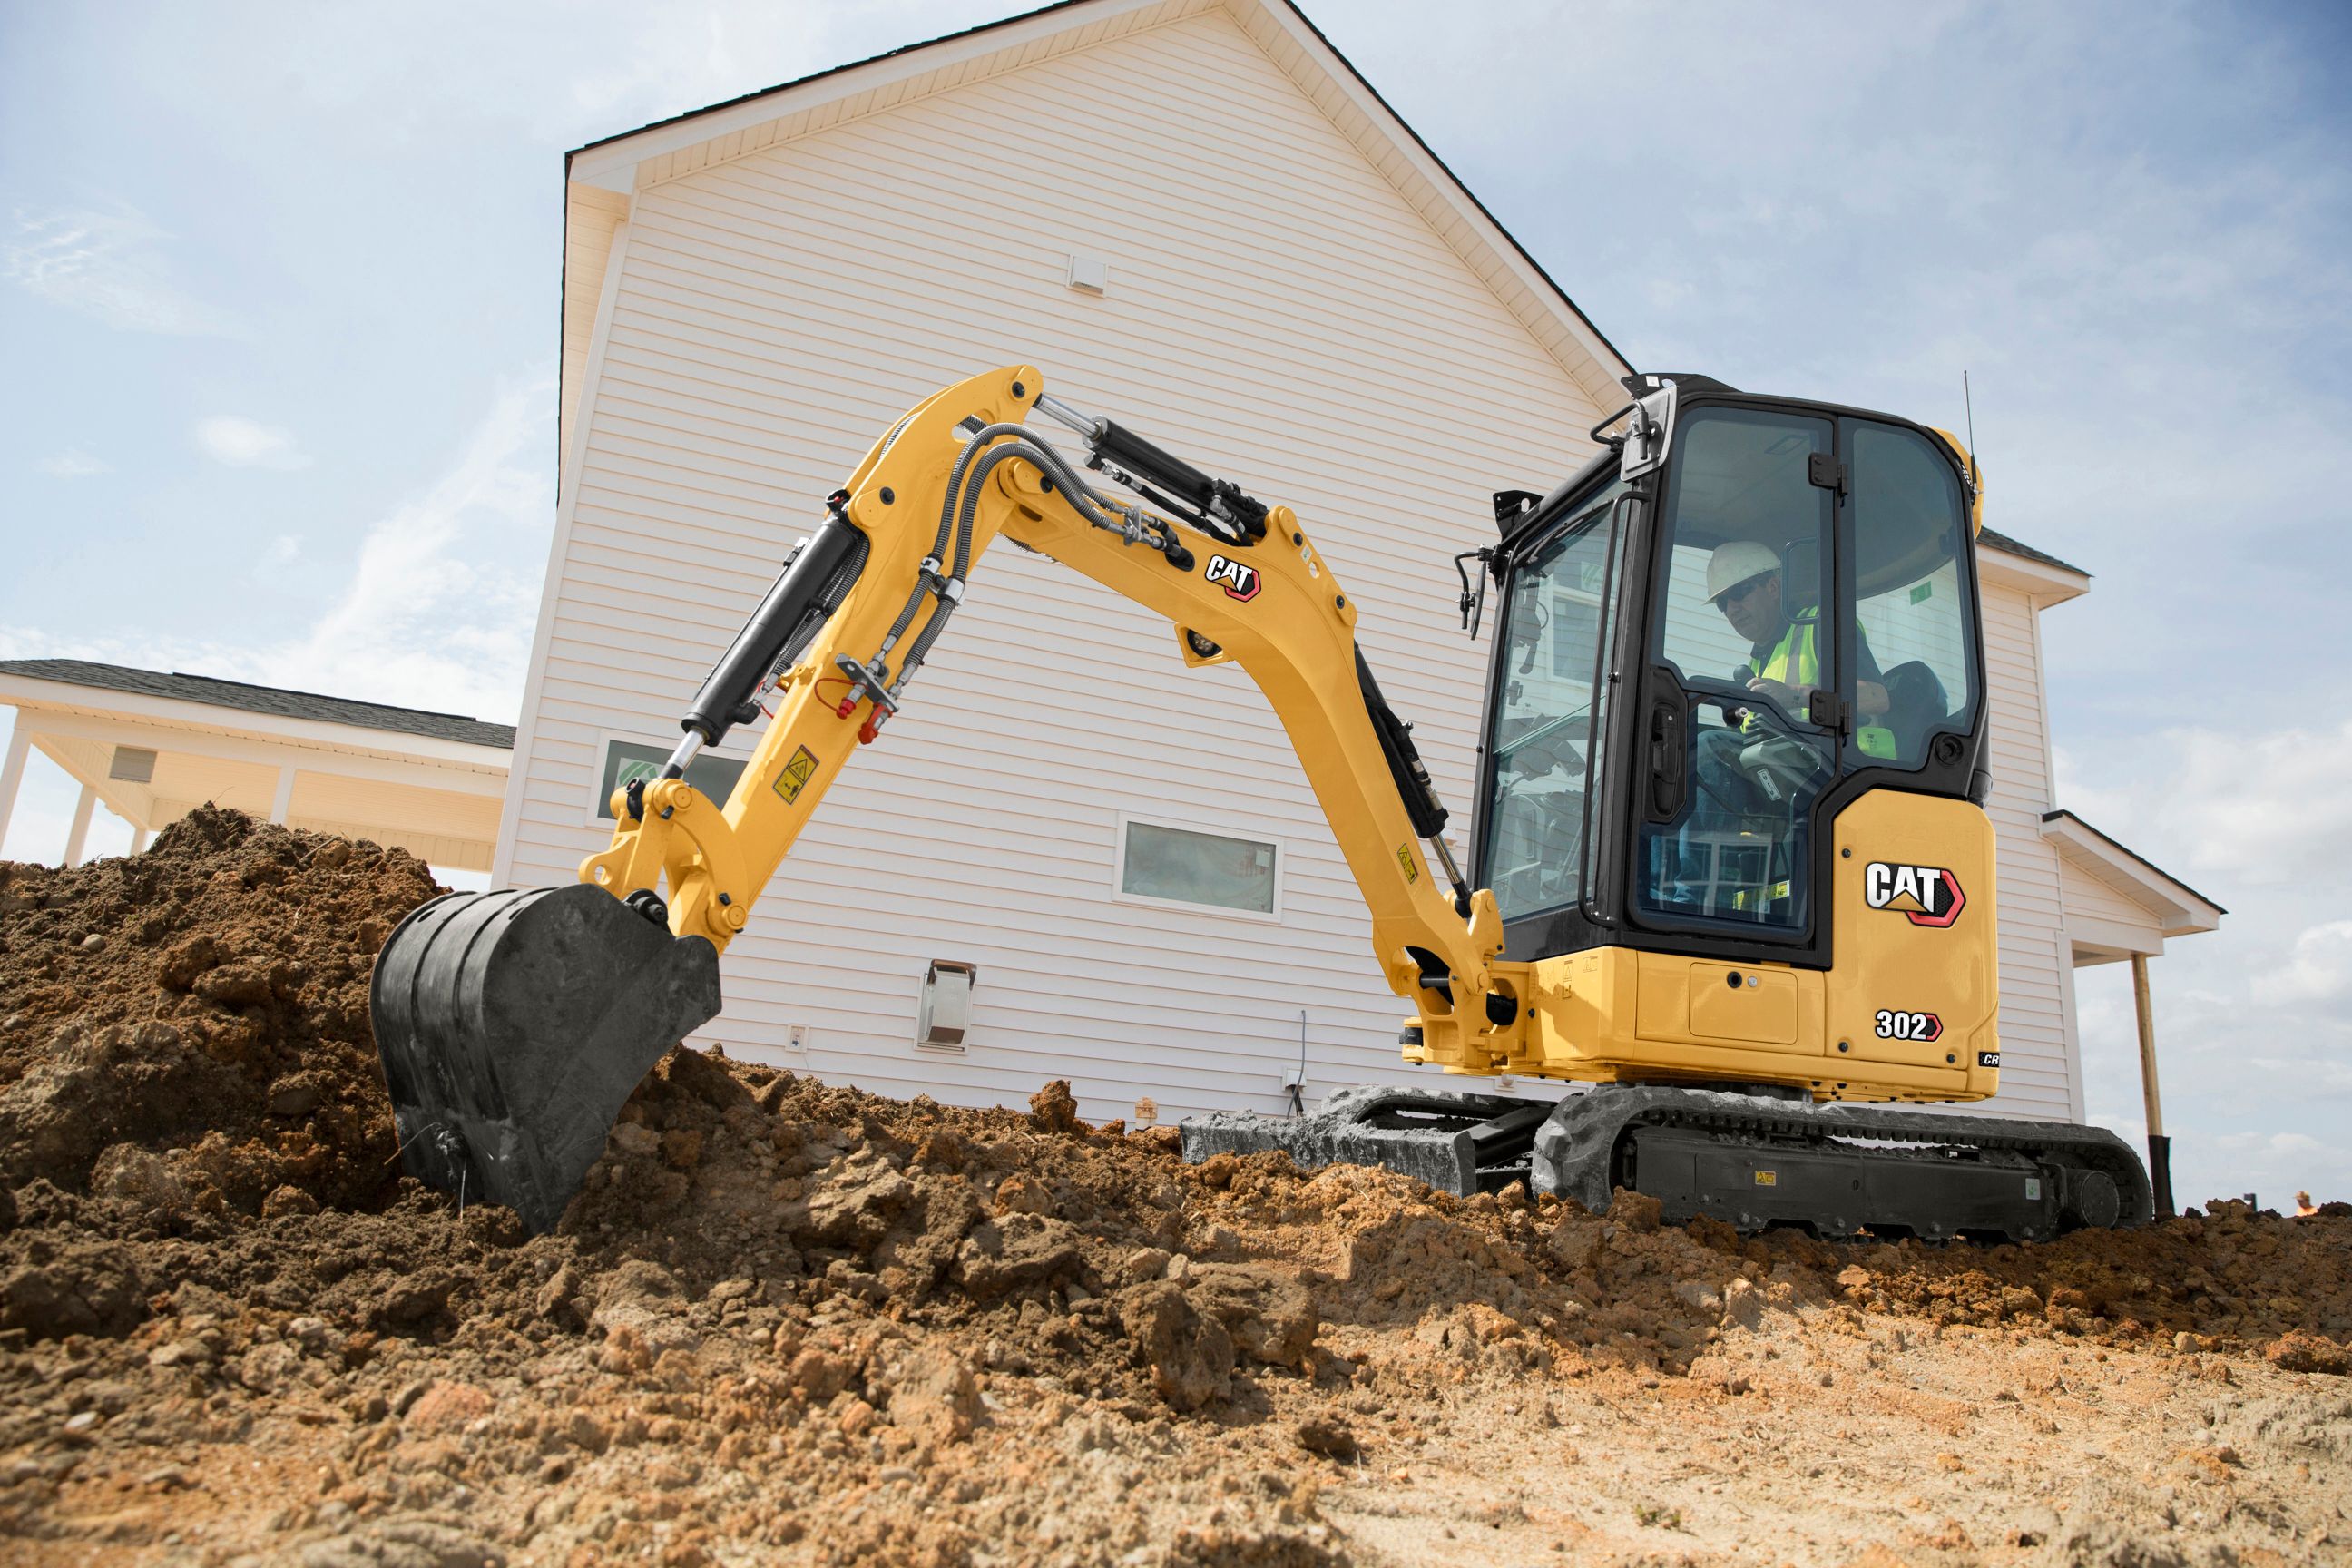 10 Most Popular Types of Heavy Equipment Used in Construction